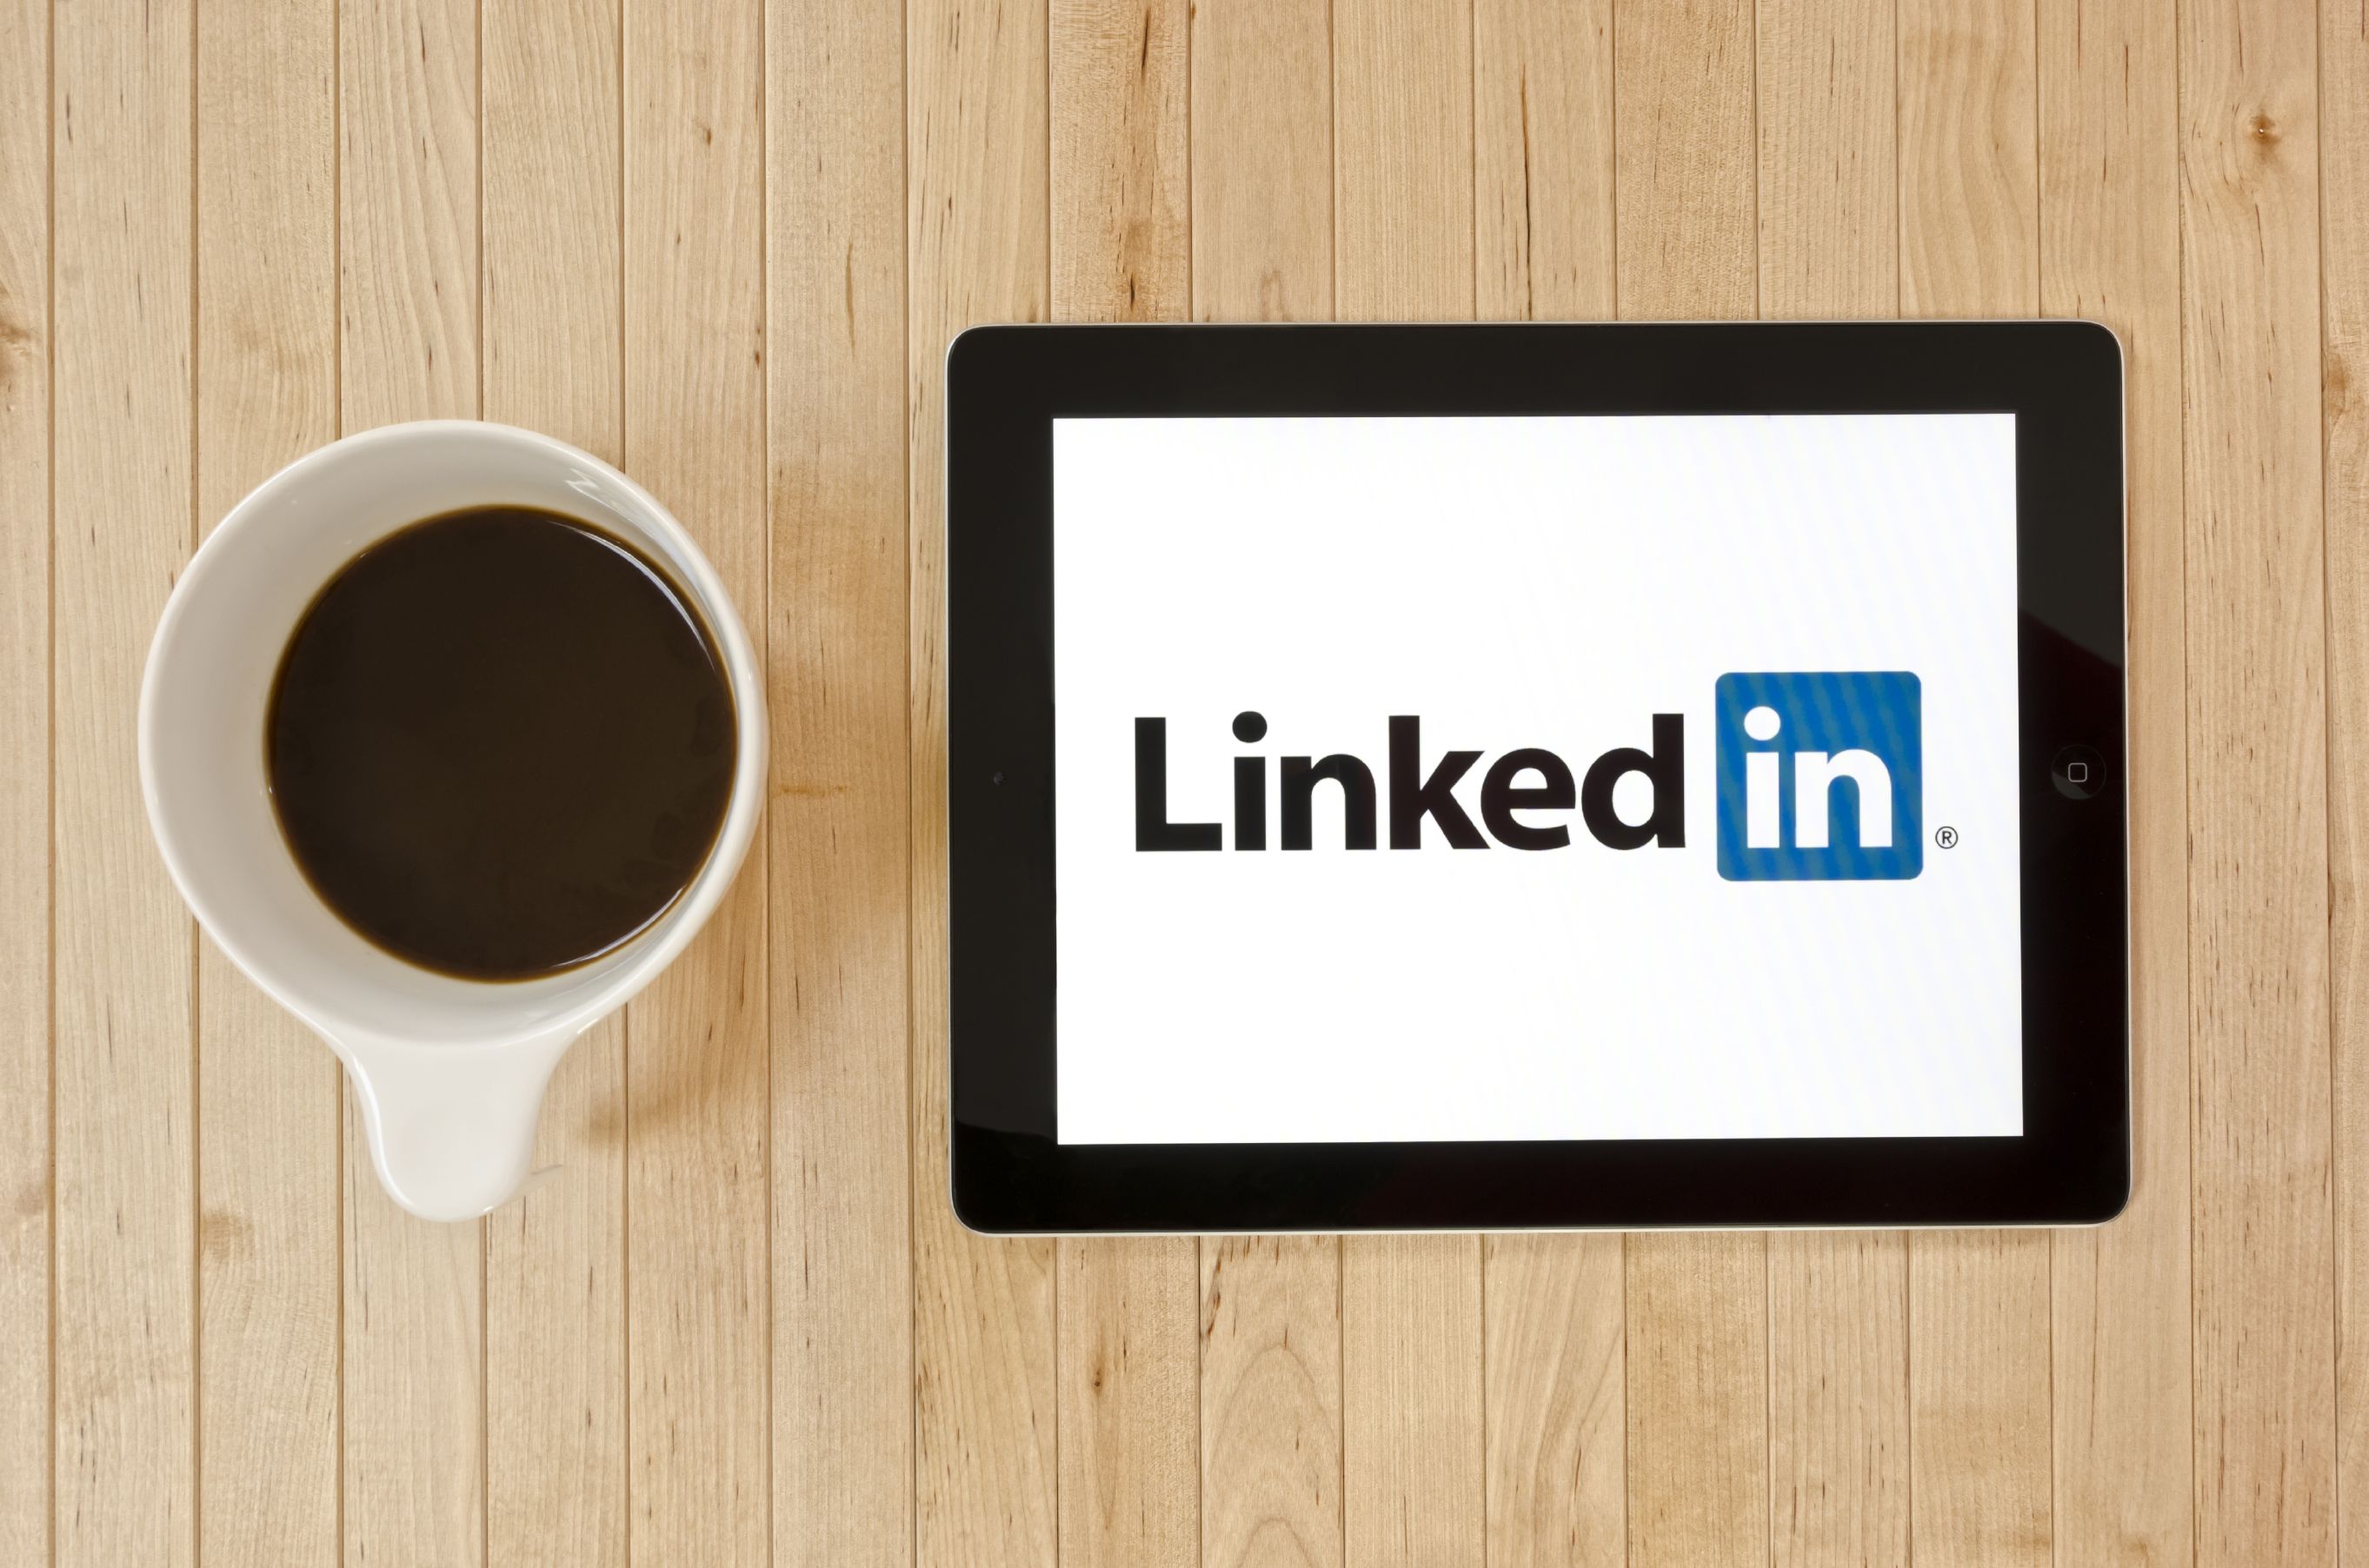 7 New Features of LinkedIn which we Cannot Miss Out